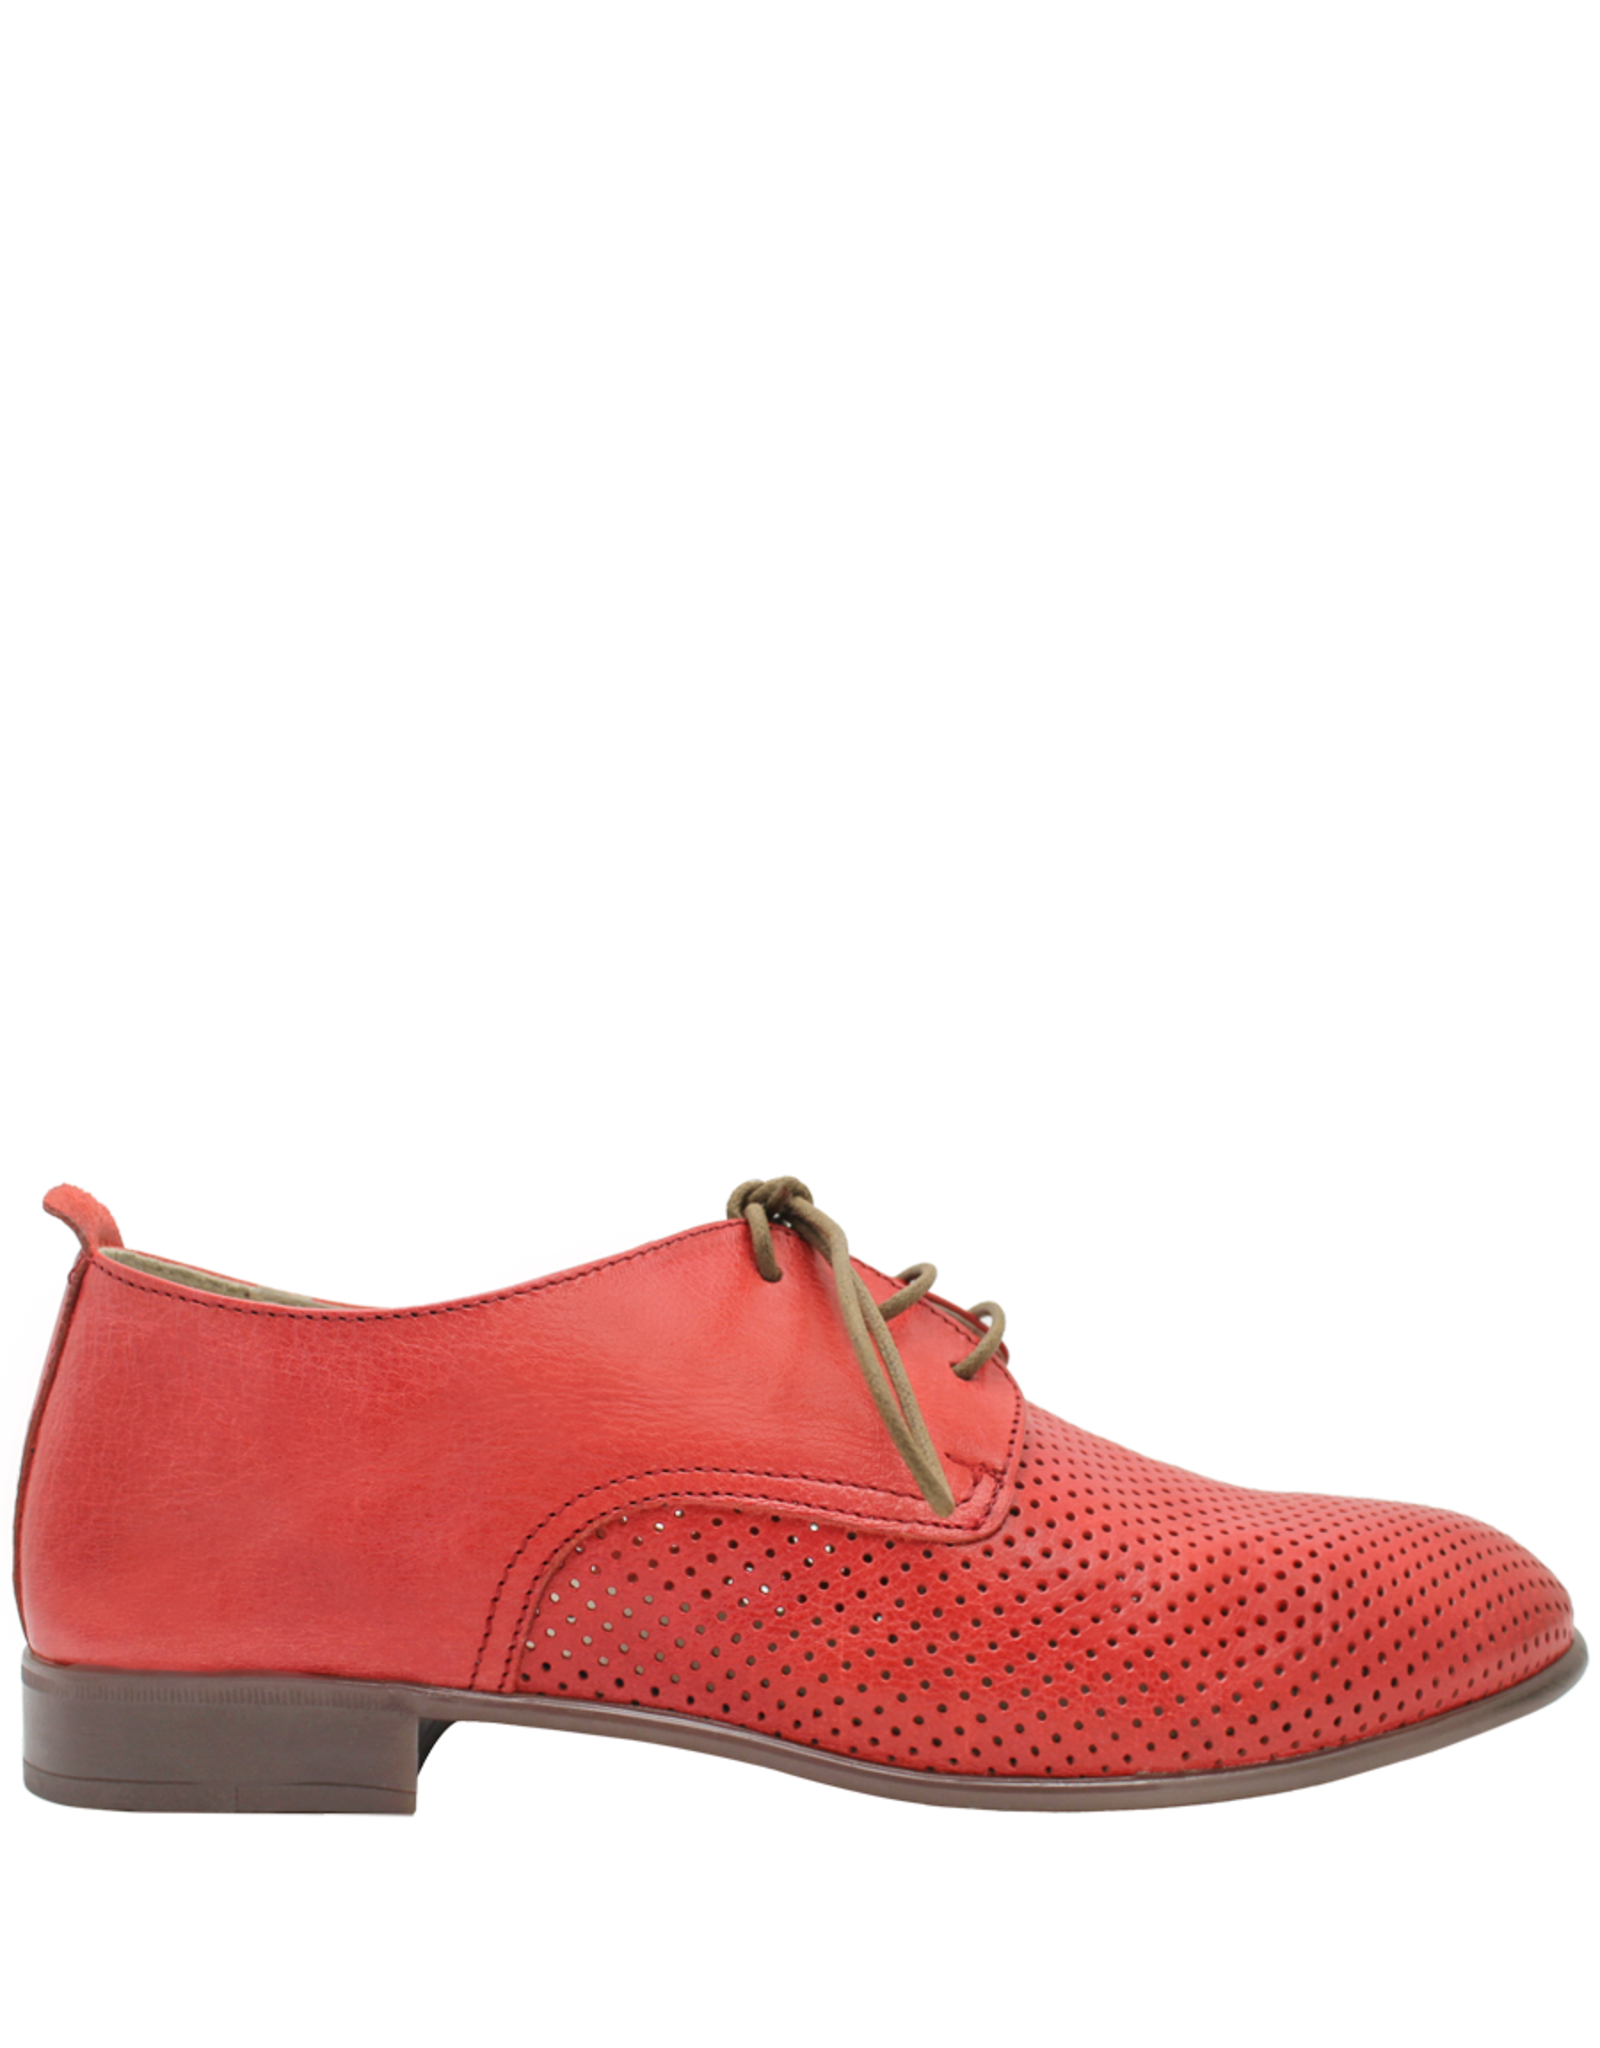 History541 History541 HF1W Coral Lace-Up With Laser Detail Julien